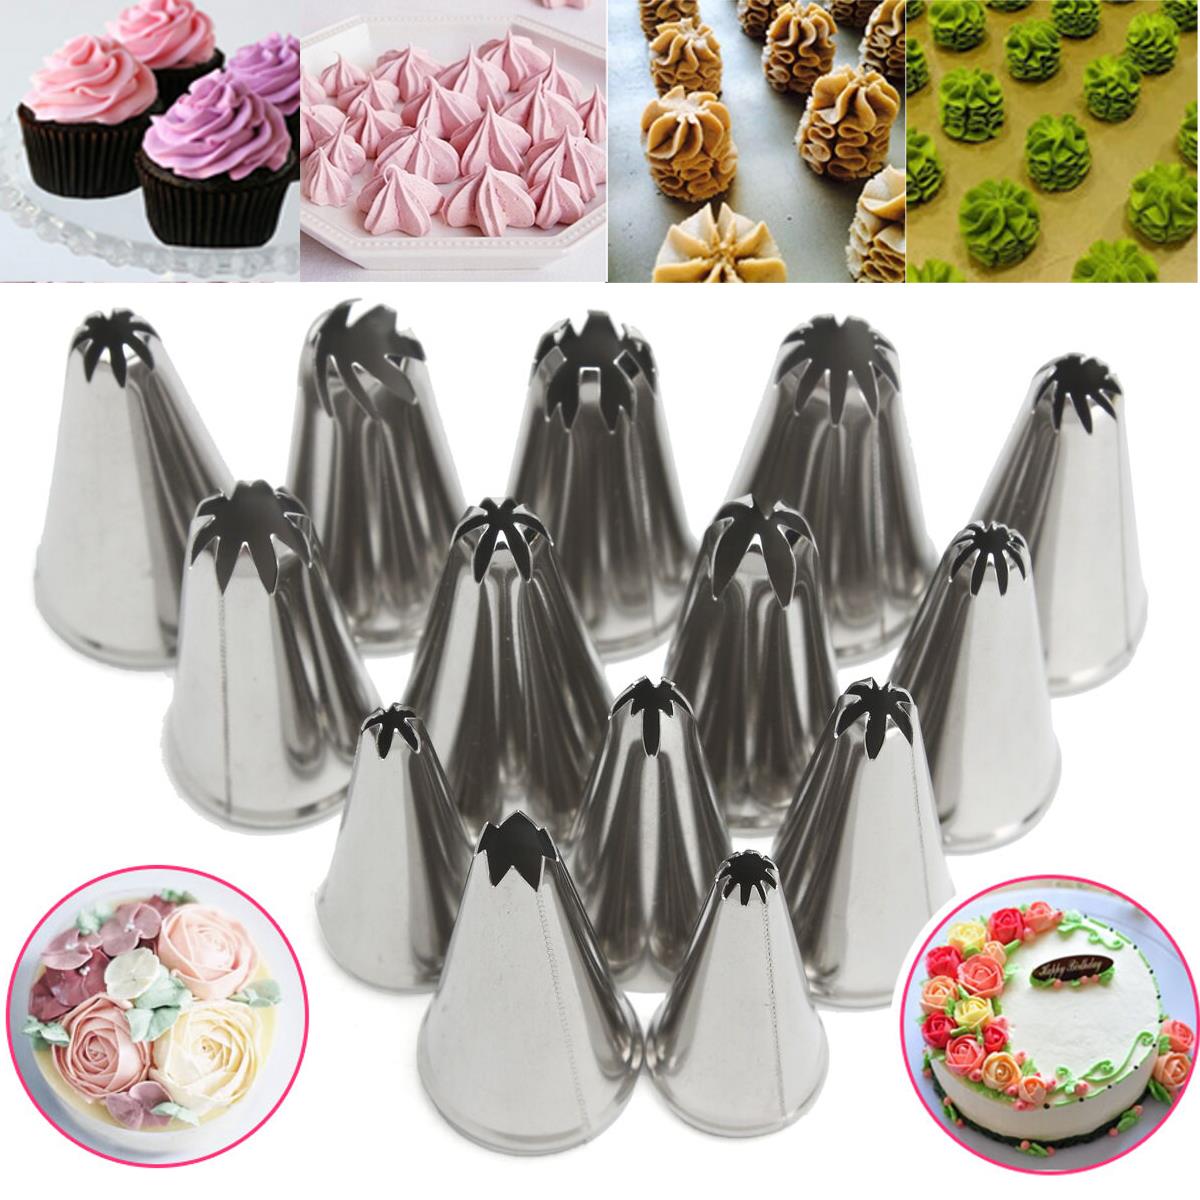 14Pcs-Stainless-Steel-Flower-Icing-Piping-Nozzles-Cake-Pastry-Decorating-Accessories-Baking-Tool-1136548-1